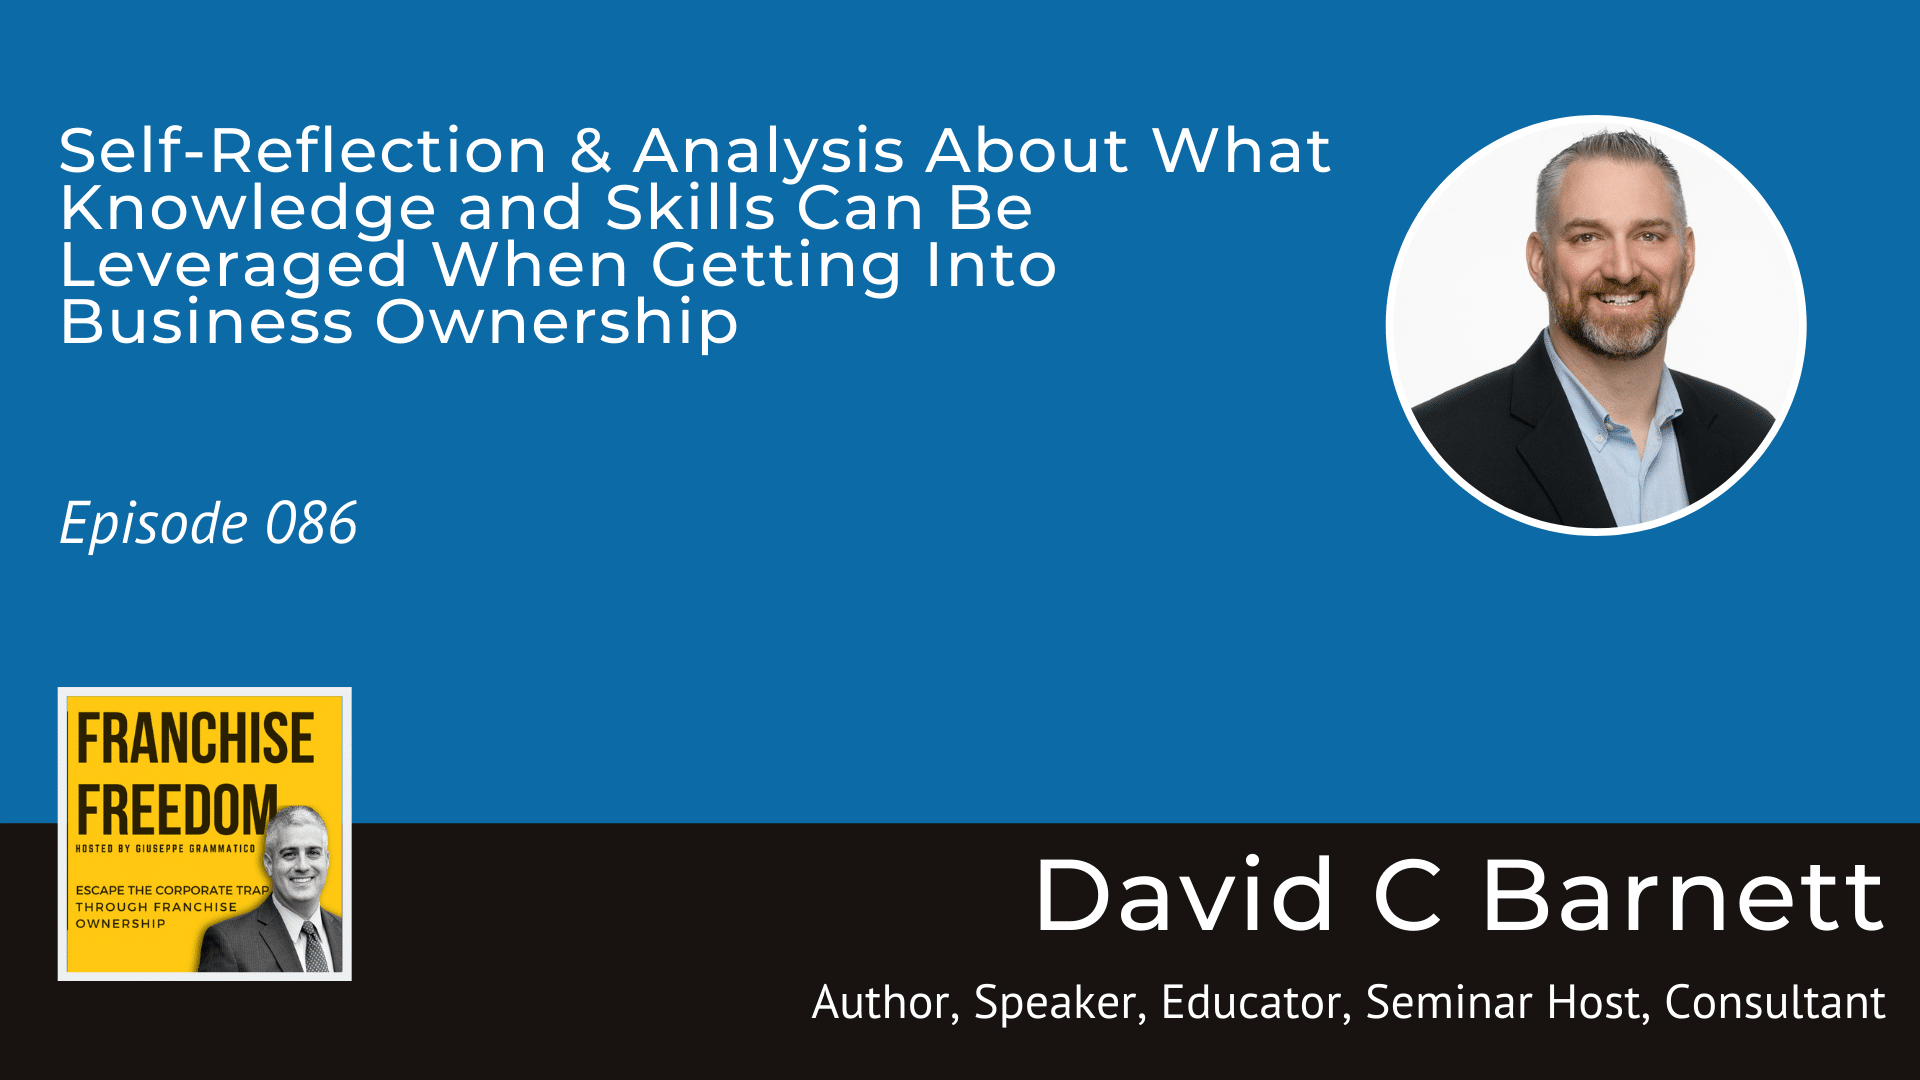 Self-Reflection & Analysis About What Knowledge and Skills Can Be Leveraged When Getting Into Business Ownership